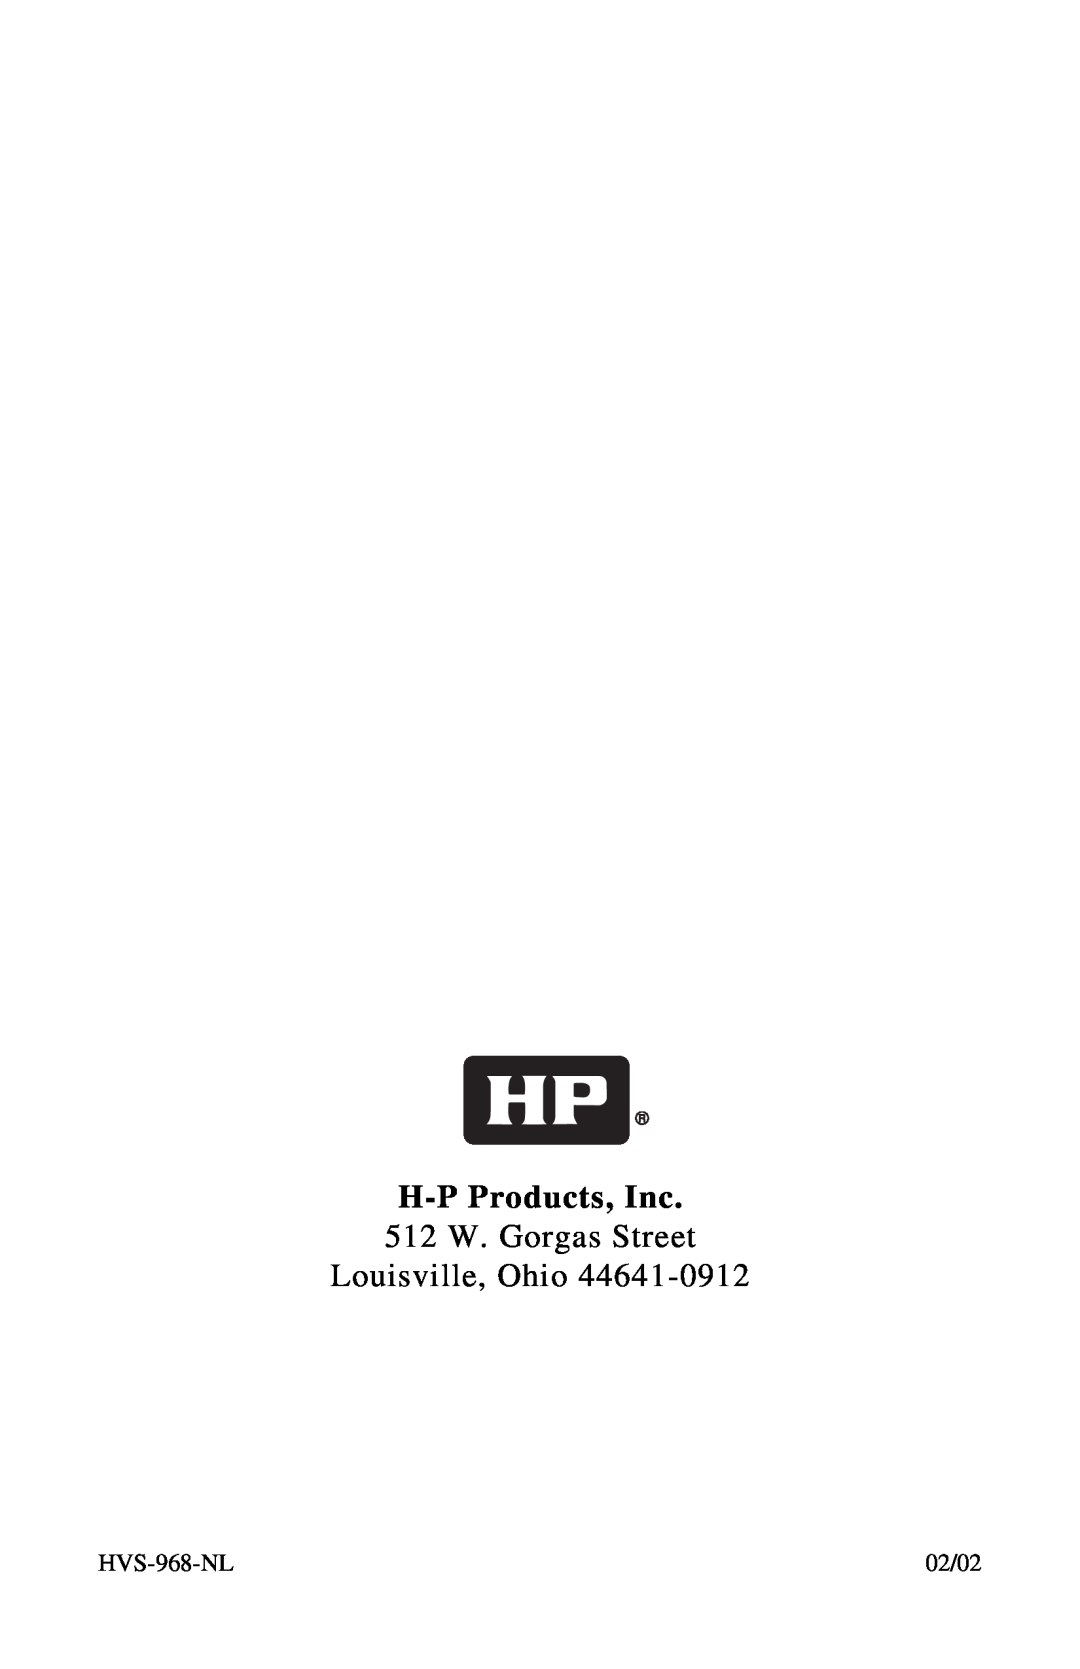 H-P Products Electroglide owner manual H-PProducts, Inc, 512 W. Gorgas Street Louisville, Ohio, HVS-968-NL, 02/02 